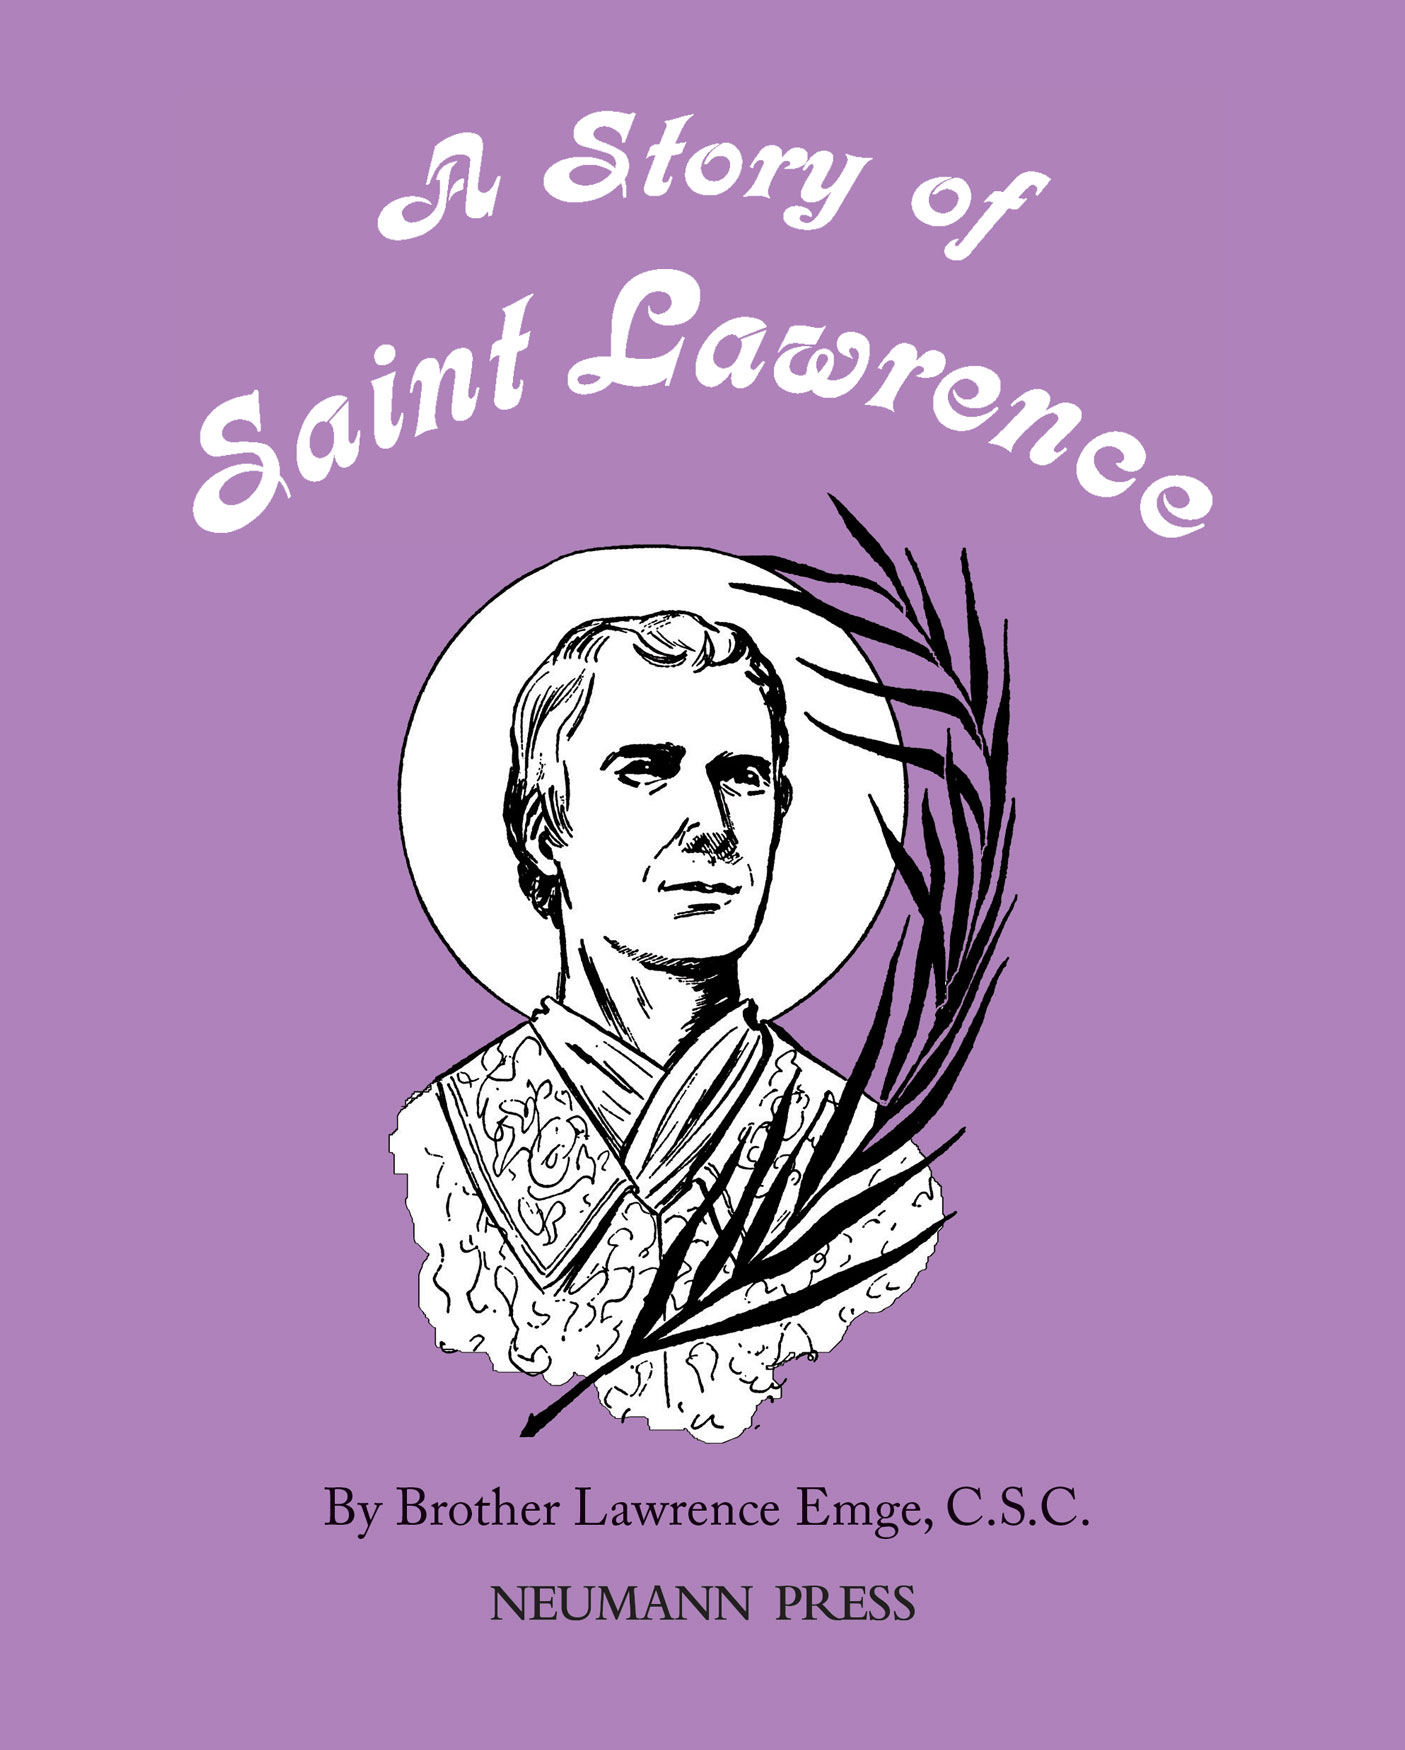 A Story of Saint Lawrence / Brother Lawrence Emge